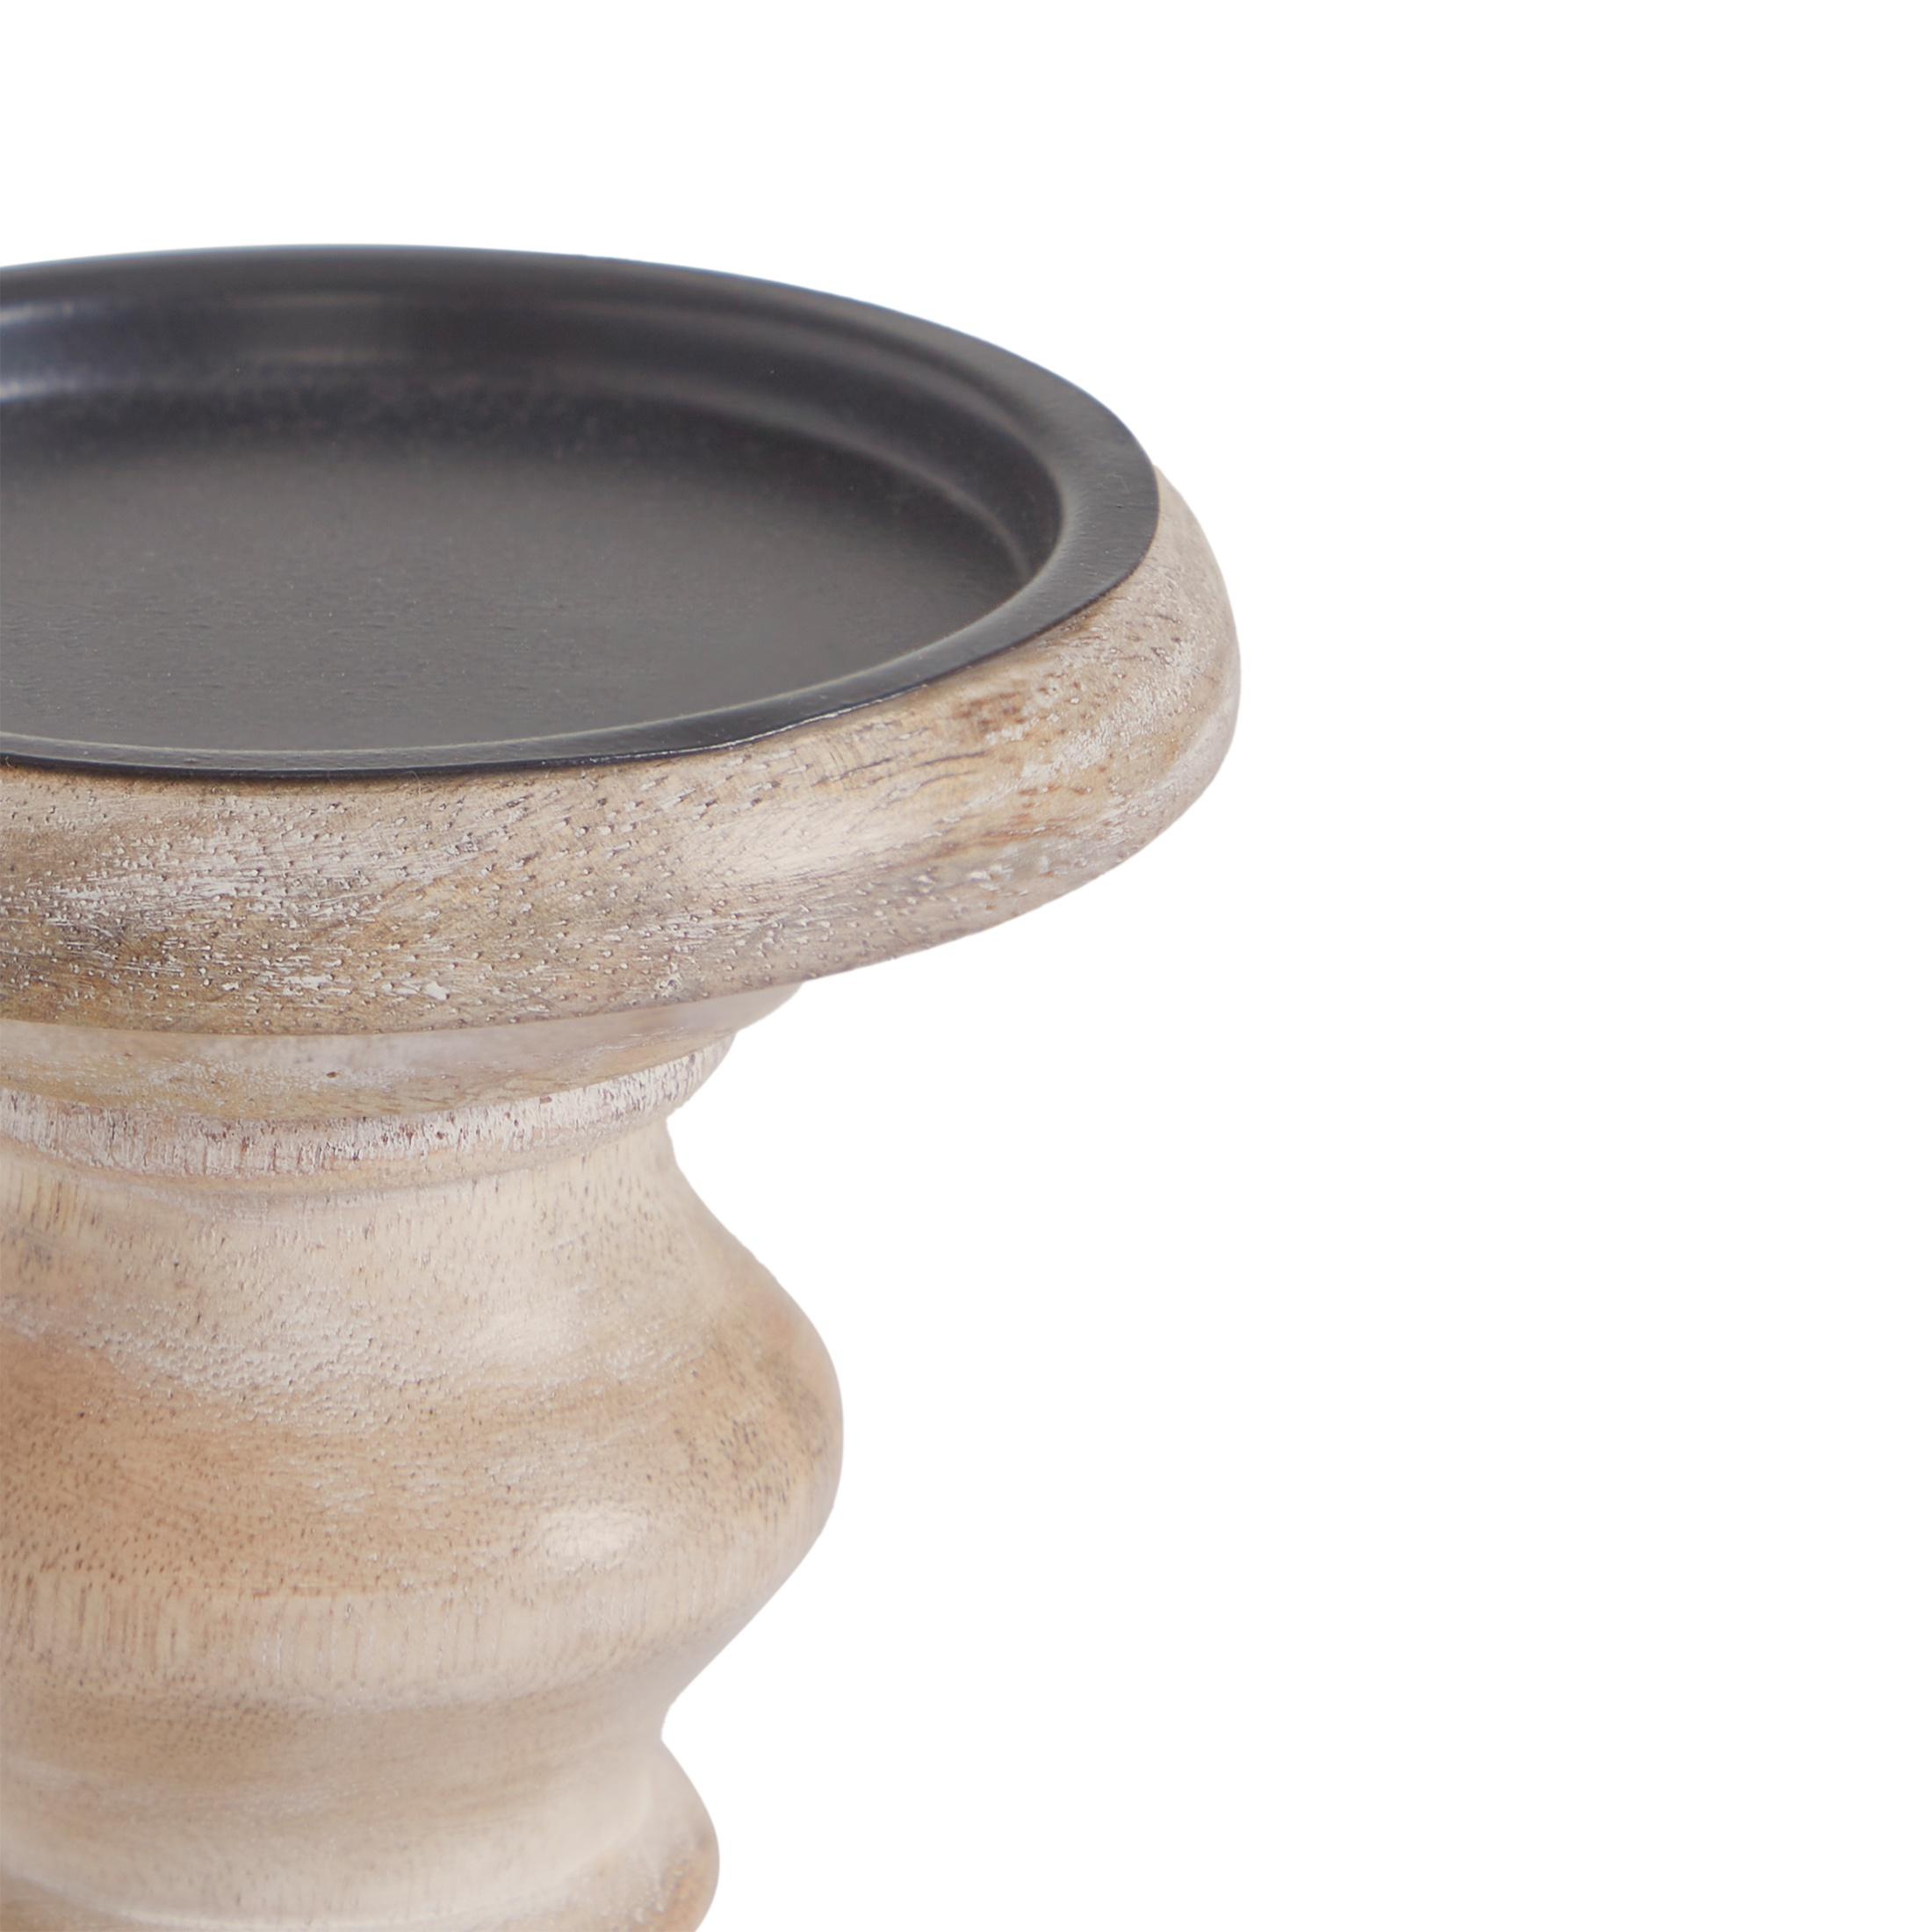 My Texas House Natural Mango Wood Pedestal Candle Holder, 8" Height - image 4 of 5